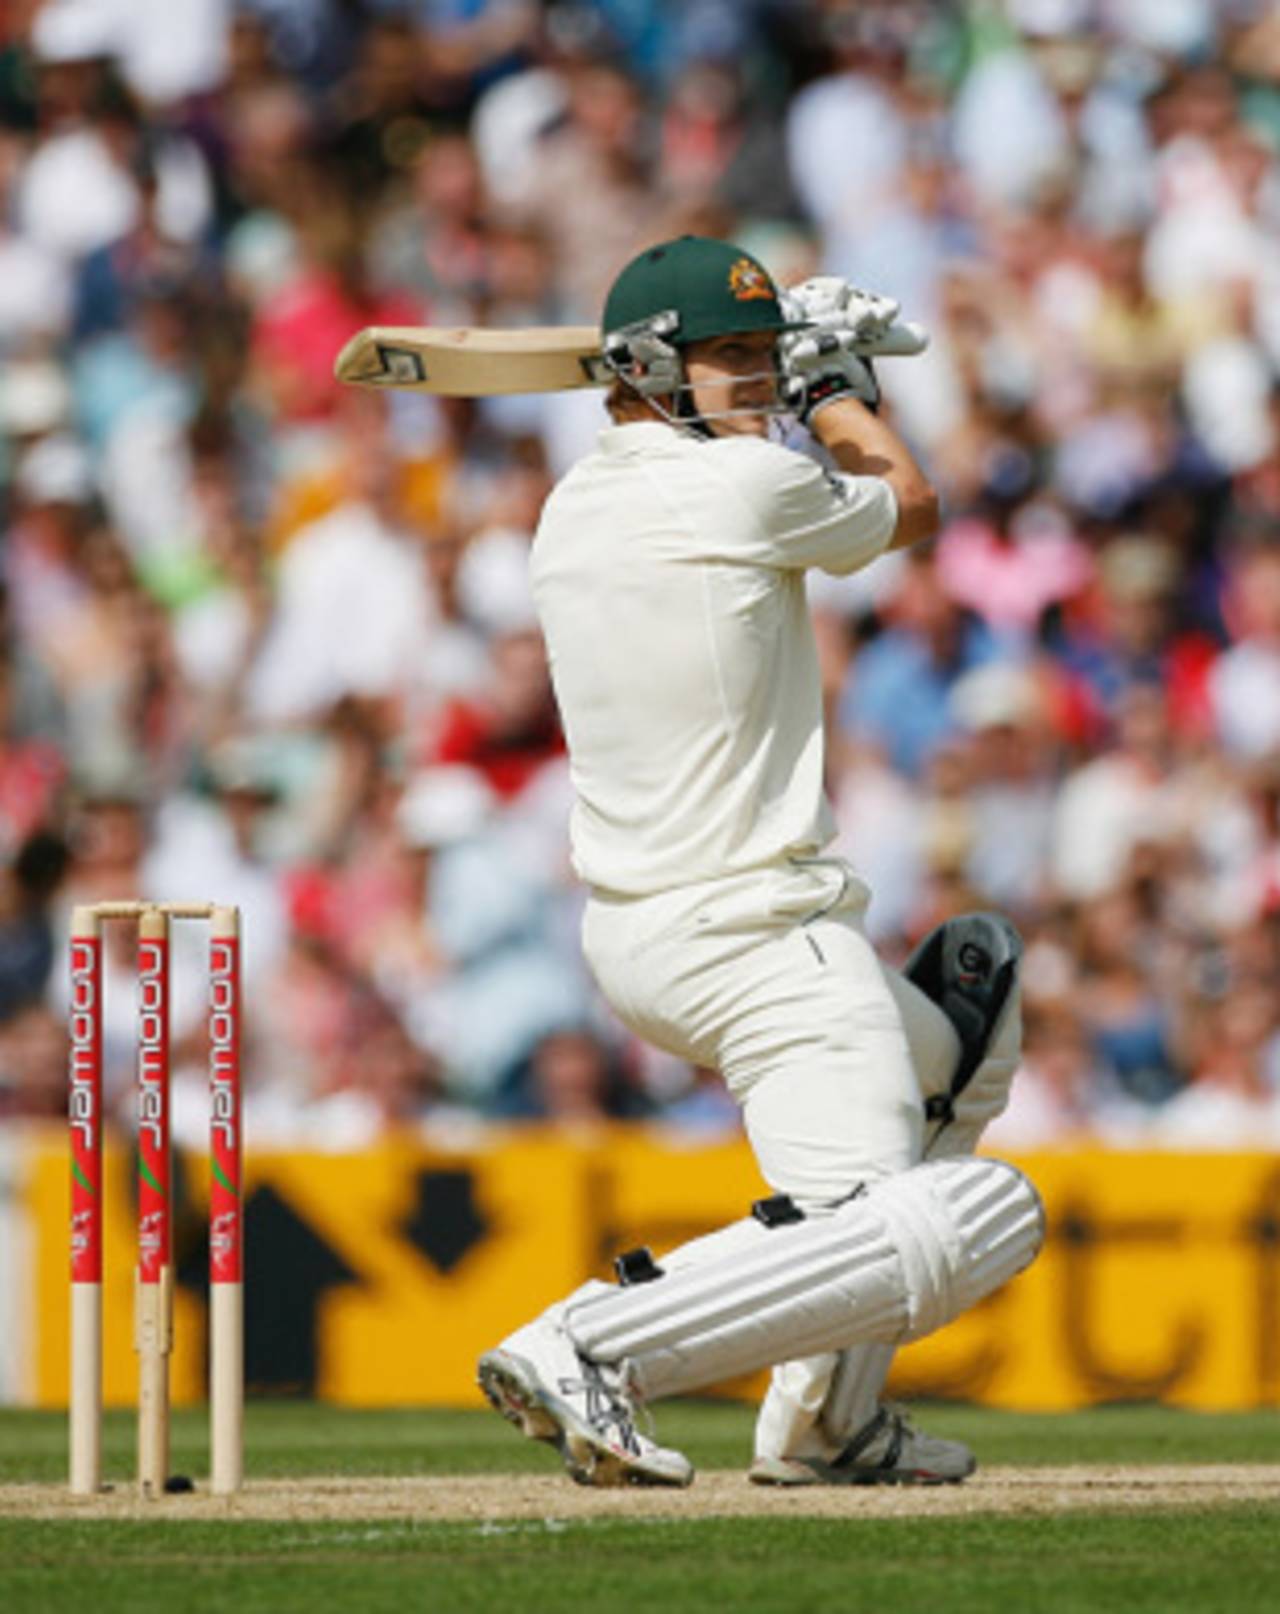 Shane Watson flashes one square of the wicket, as another appeal is rejected, England v Australia, 5th Test, The Oval, 2nd day, August 21, 2009